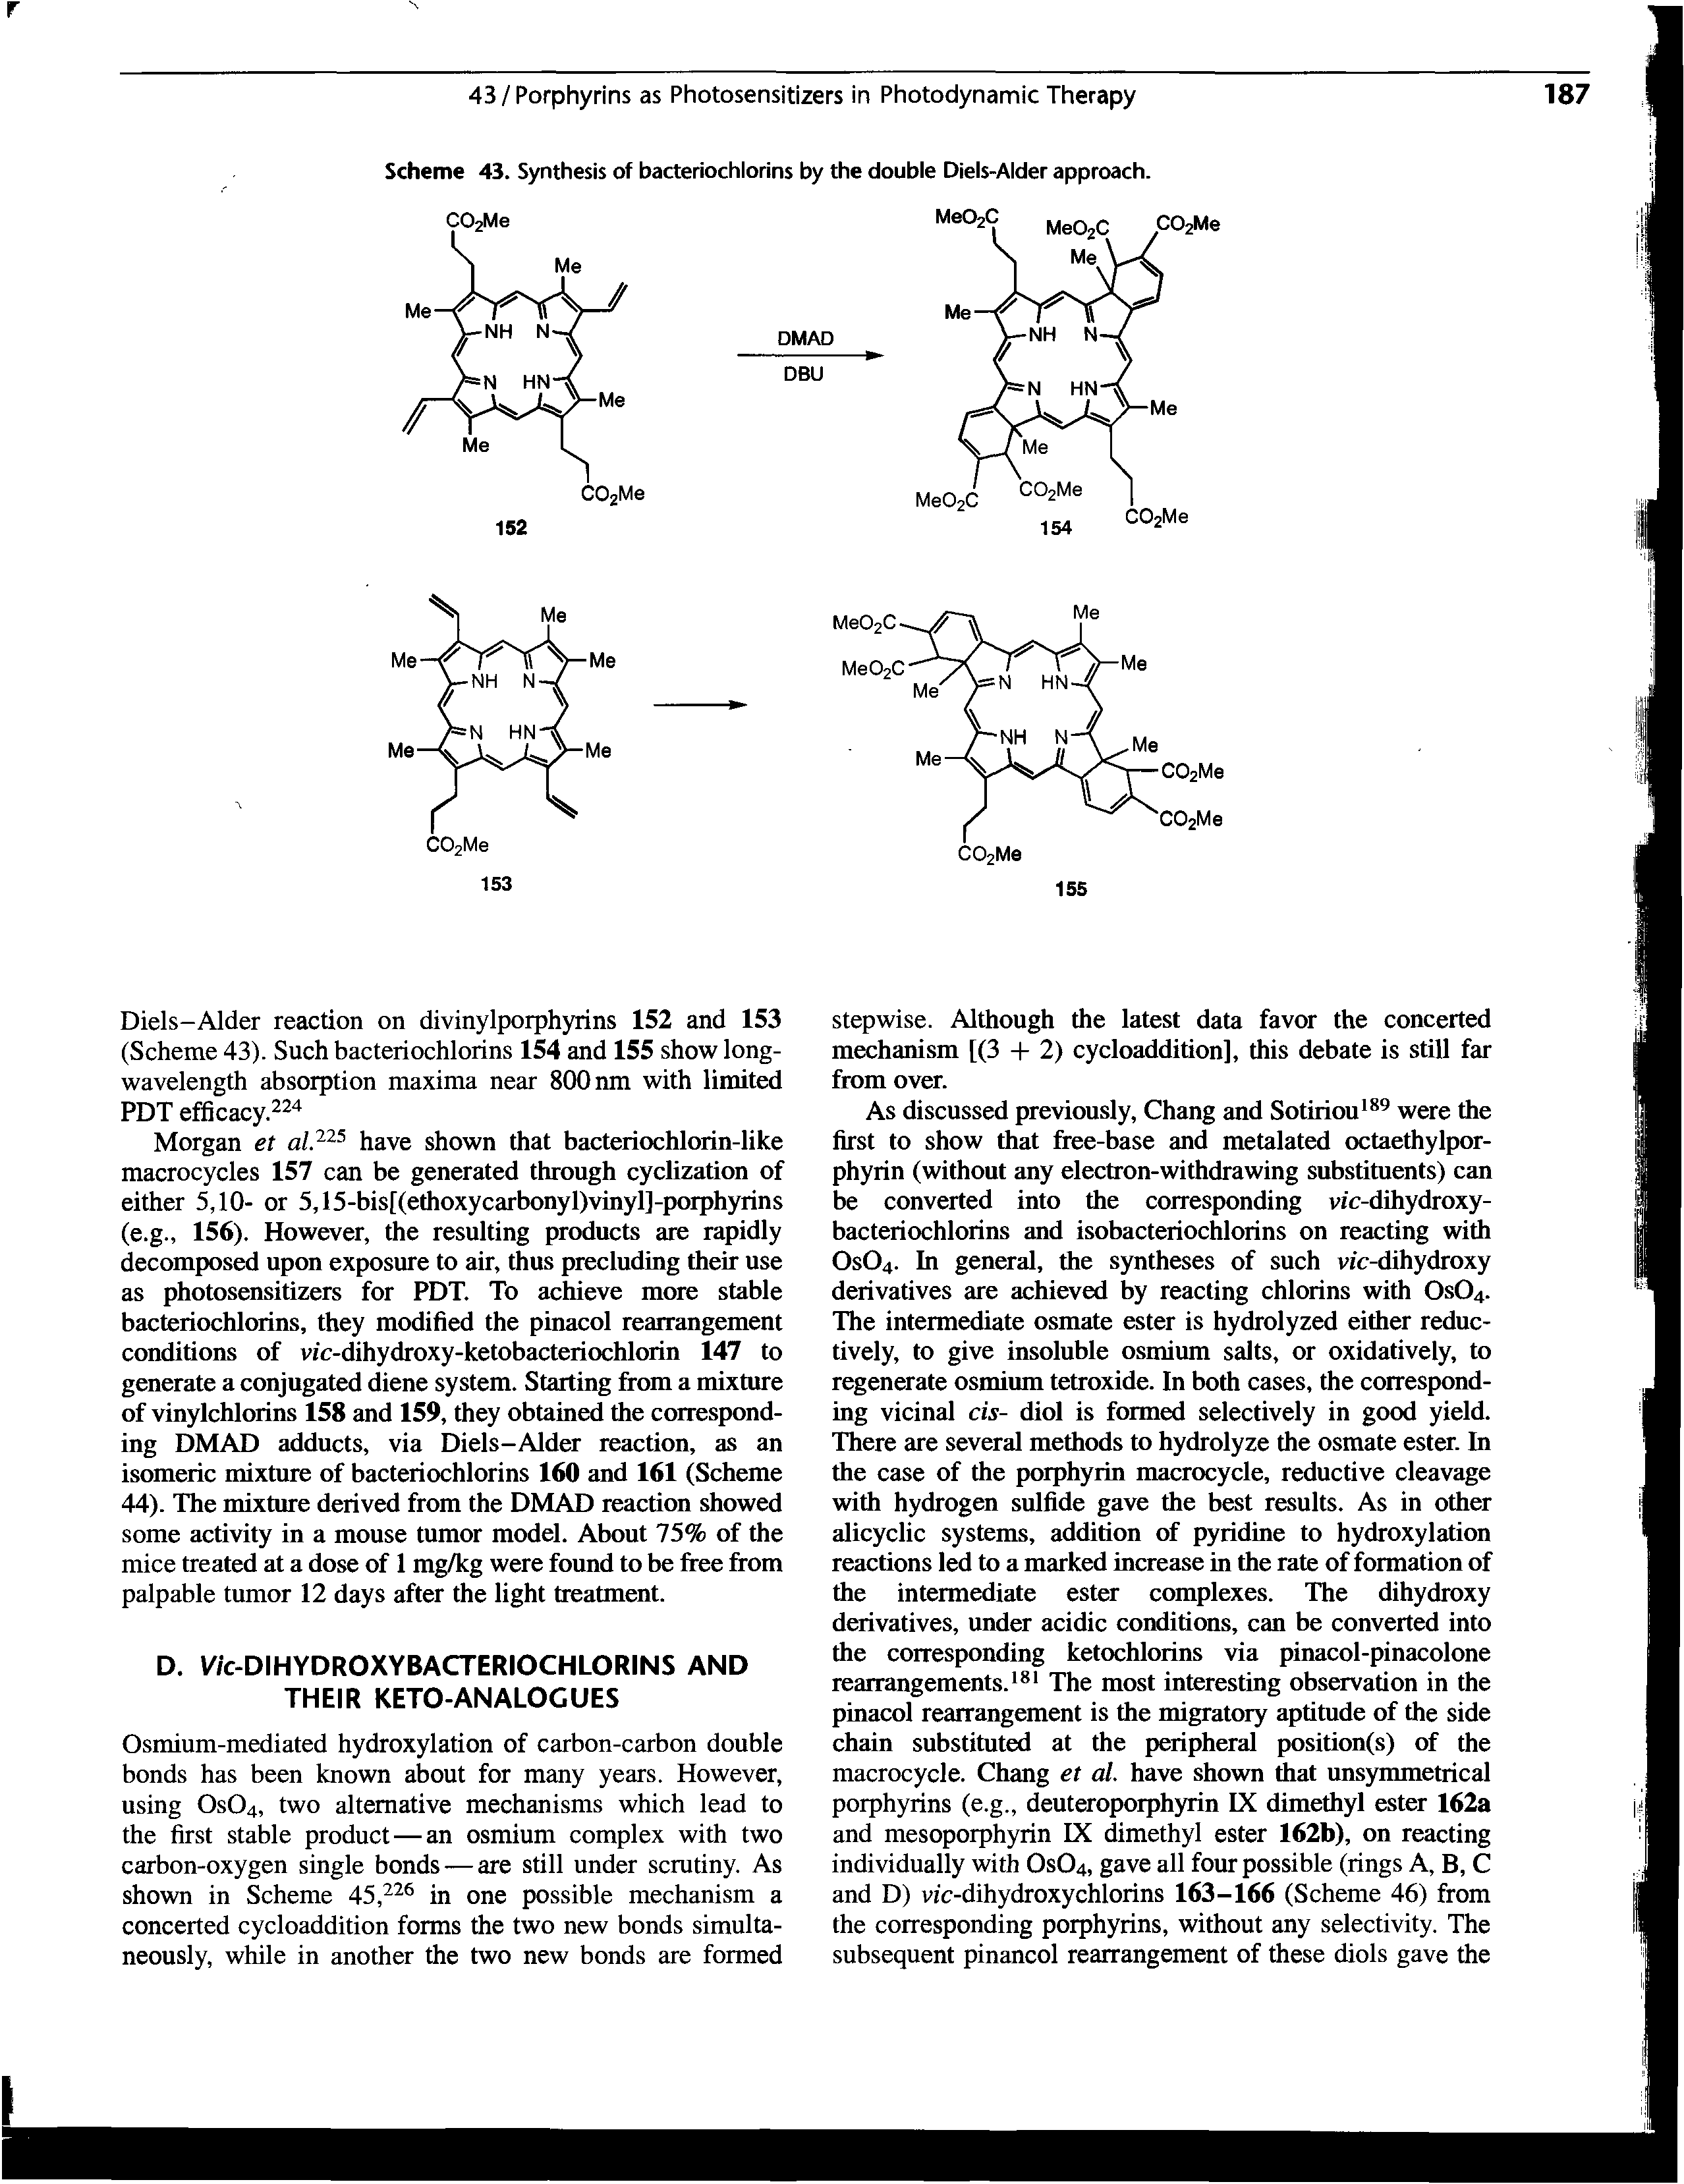 Scheme 43. Synthesis of bacteriochlorins by the double Diels-Alder approach.